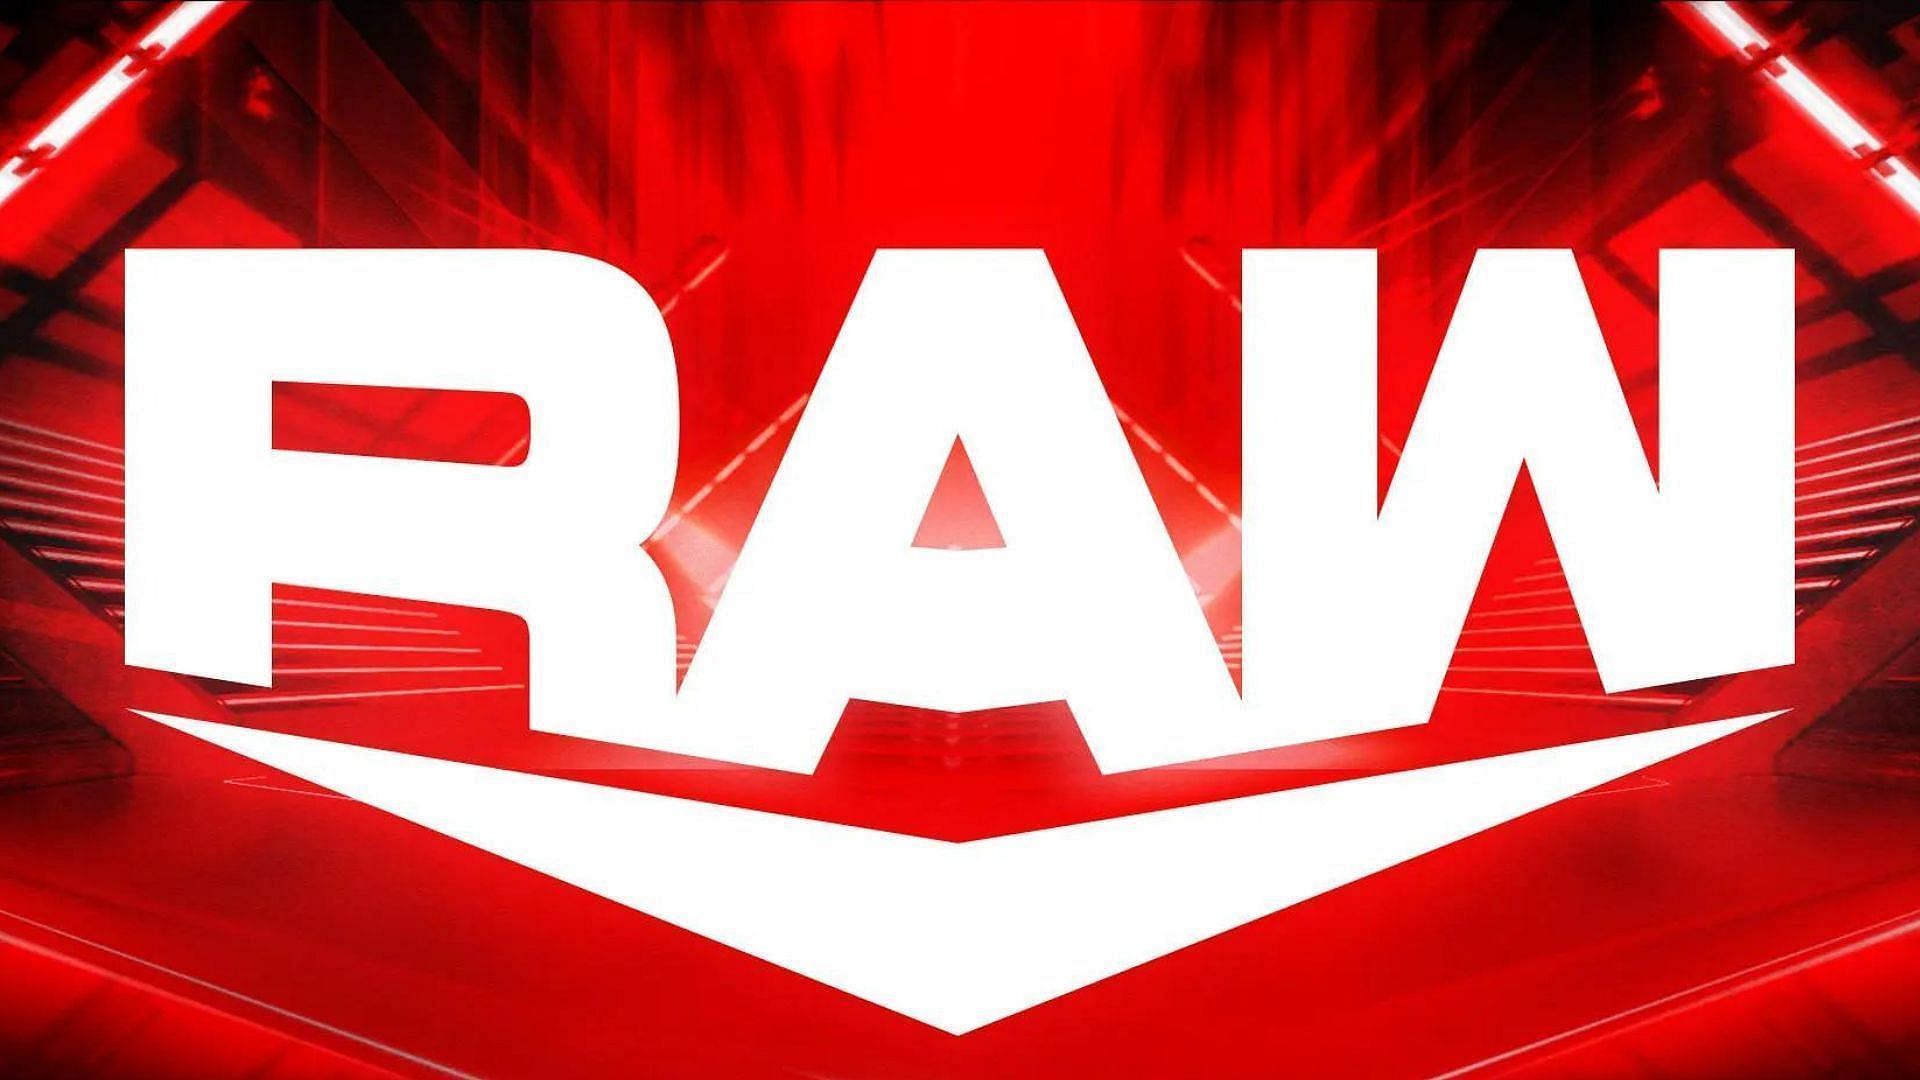 The RAW Superstar will be involved in a huge match at WWE Summerslam 